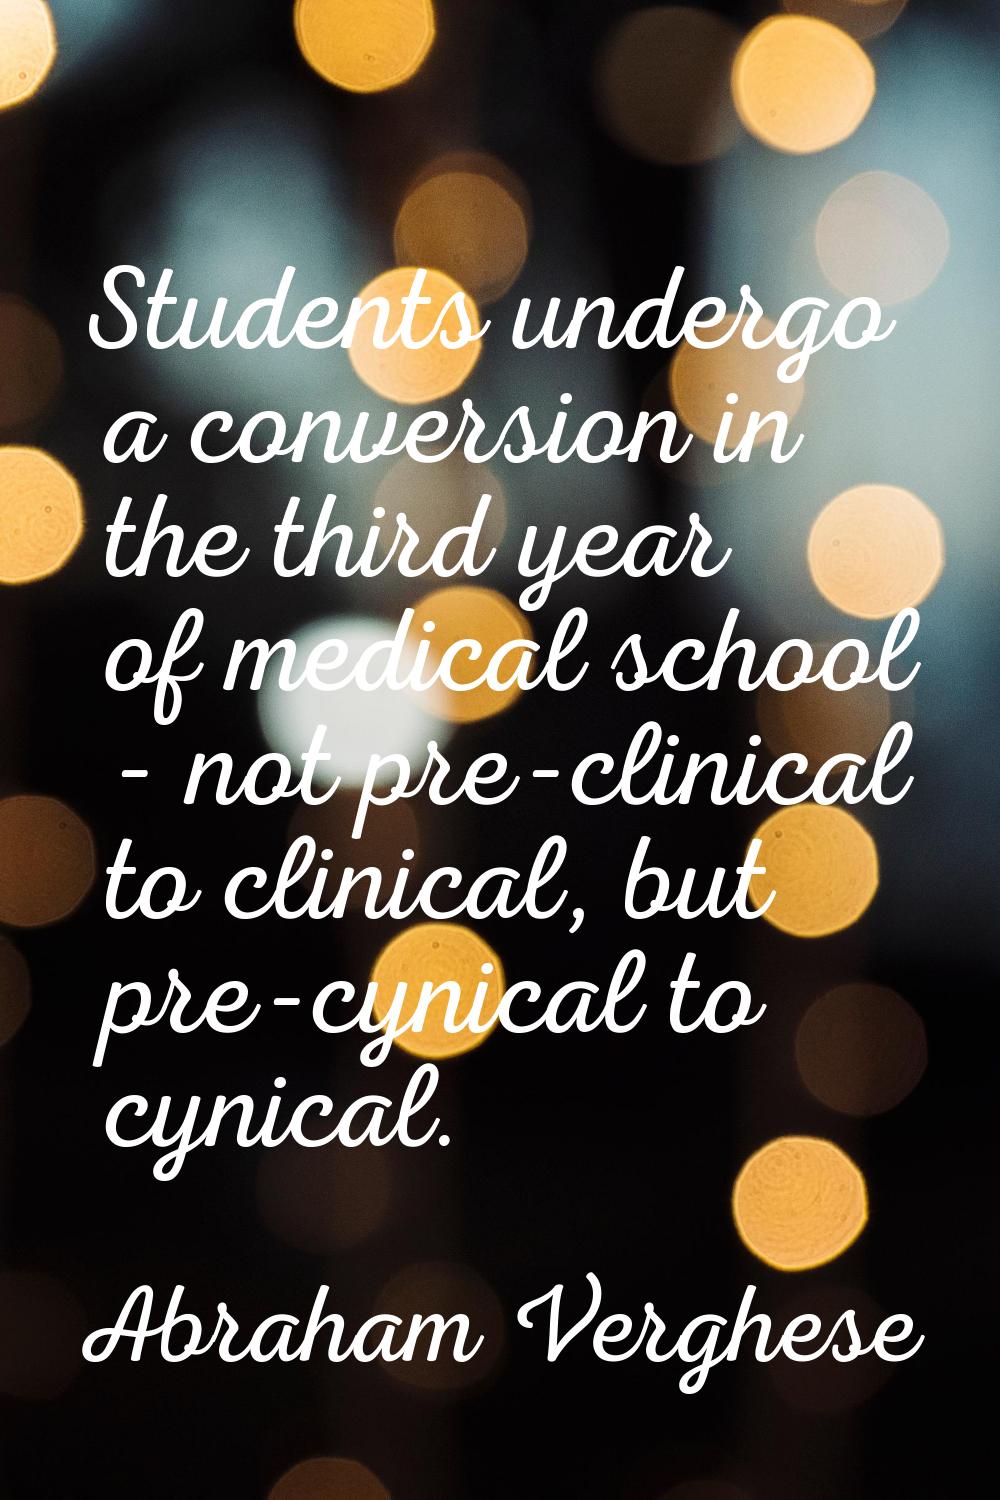 Students undergo a conversion in the third year of medical school - not pre-clinical to clinical, b